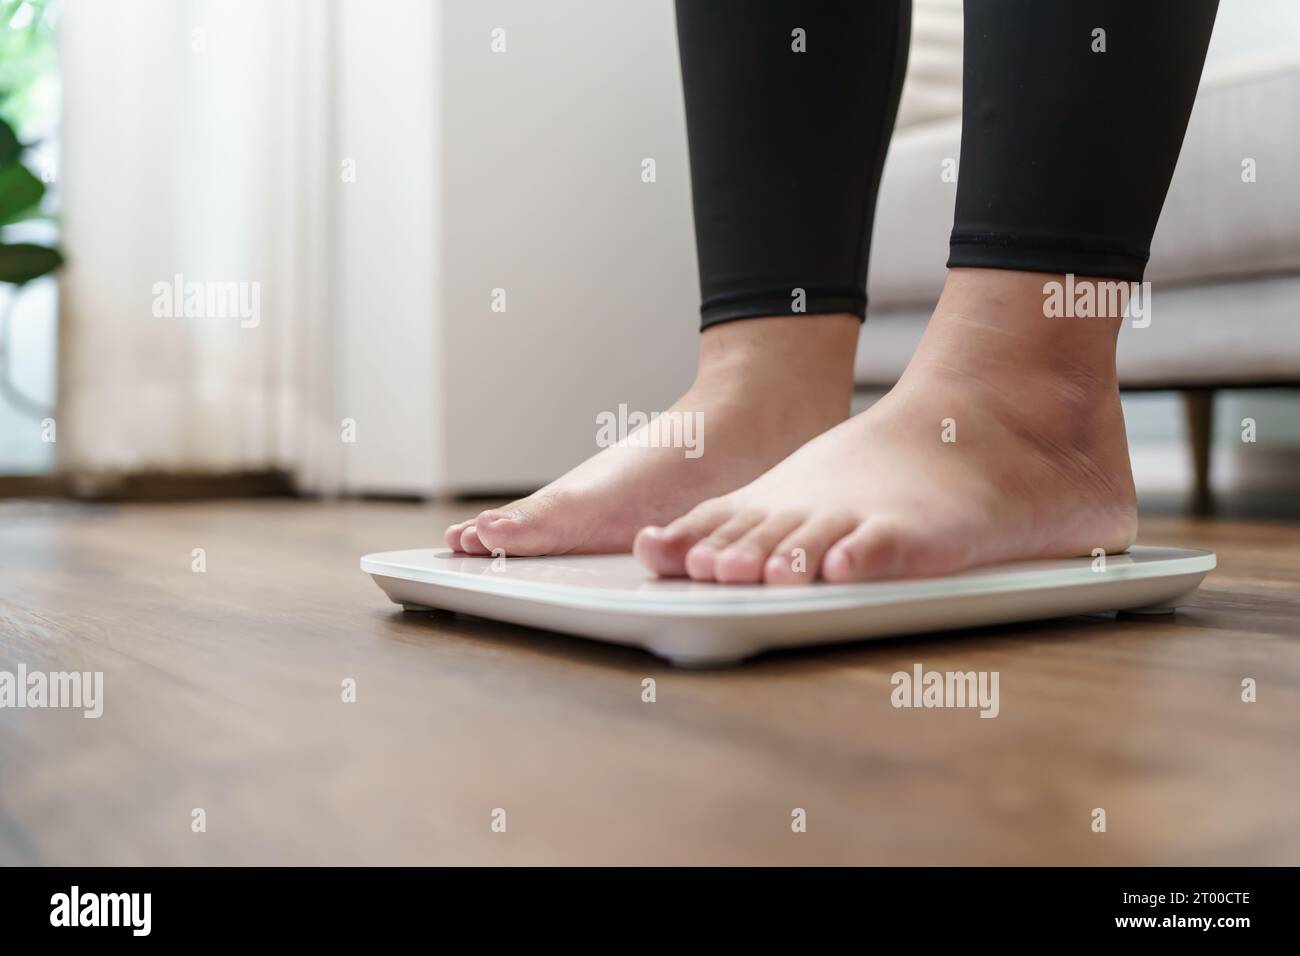 Woman bare feet standing on a digital scale with body fat analyzer that  uses bioelectrical impedance (BIA) to gauge the amount of fat in your body  Stock Photo